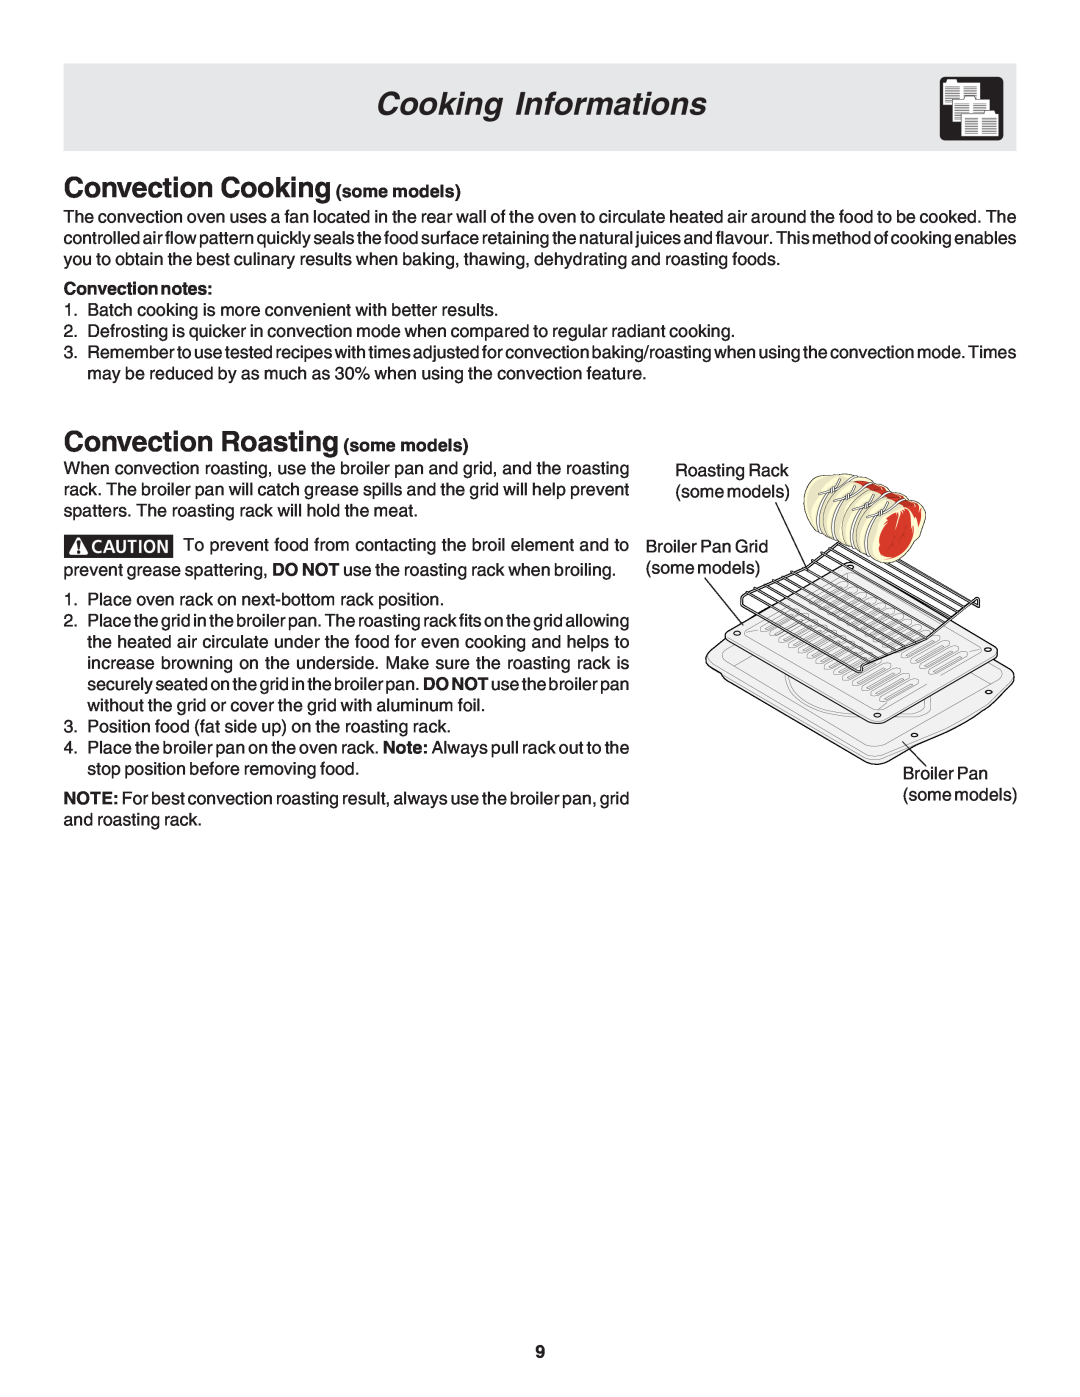 Frigidaire 318205116 warranty Convection Cooking some models, Convection Roasting some models, Convection notes 